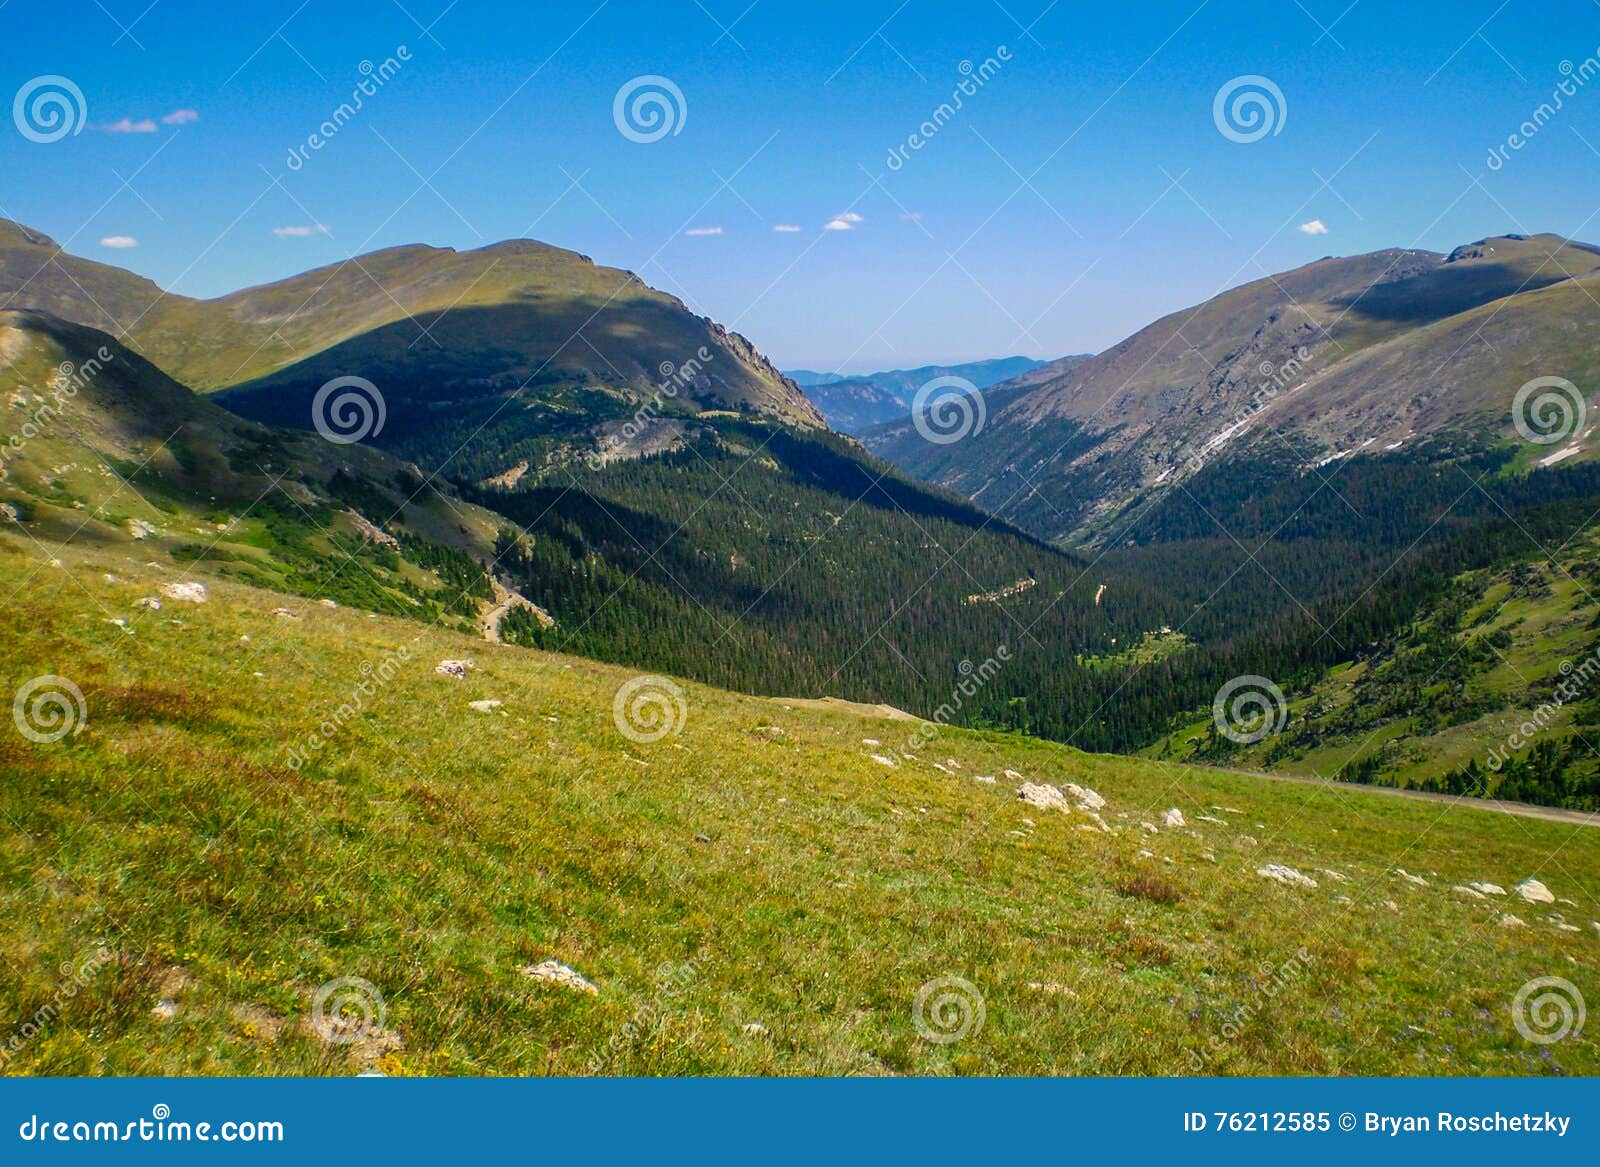 Colorado Late Summer Mountain Scene Stock Image - Image of state ...